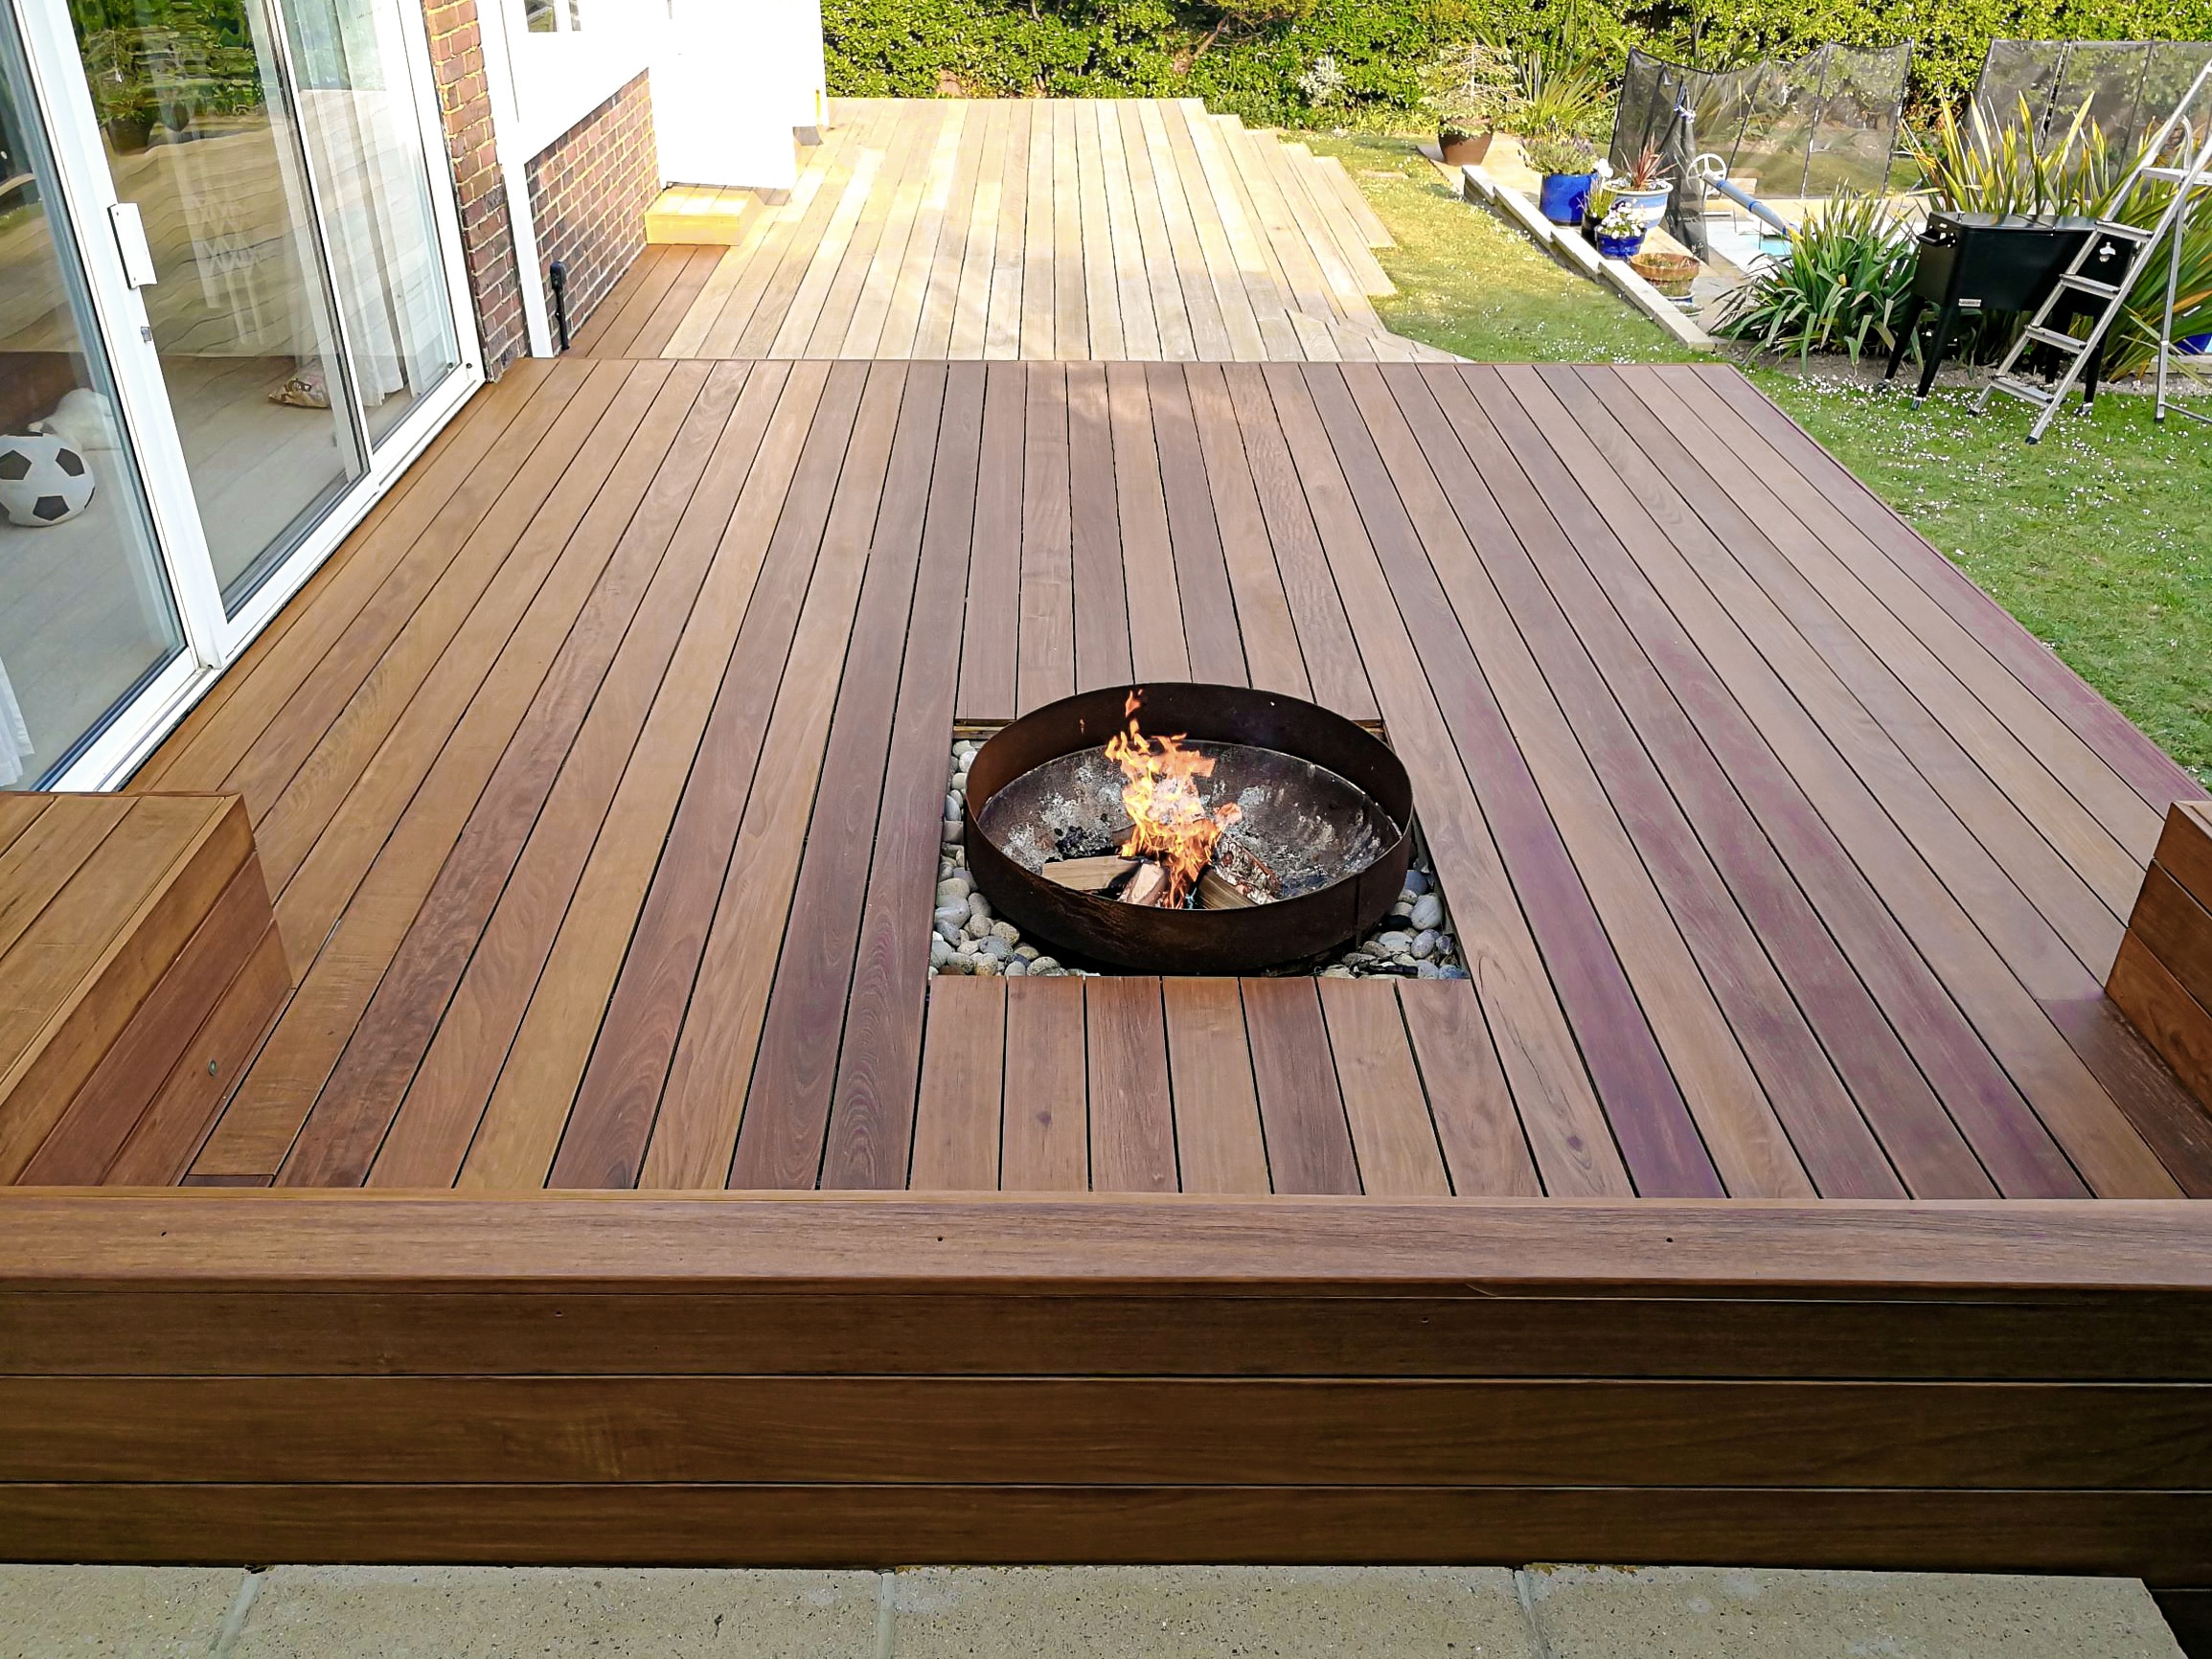 Aquadecks applied to deck with firepit